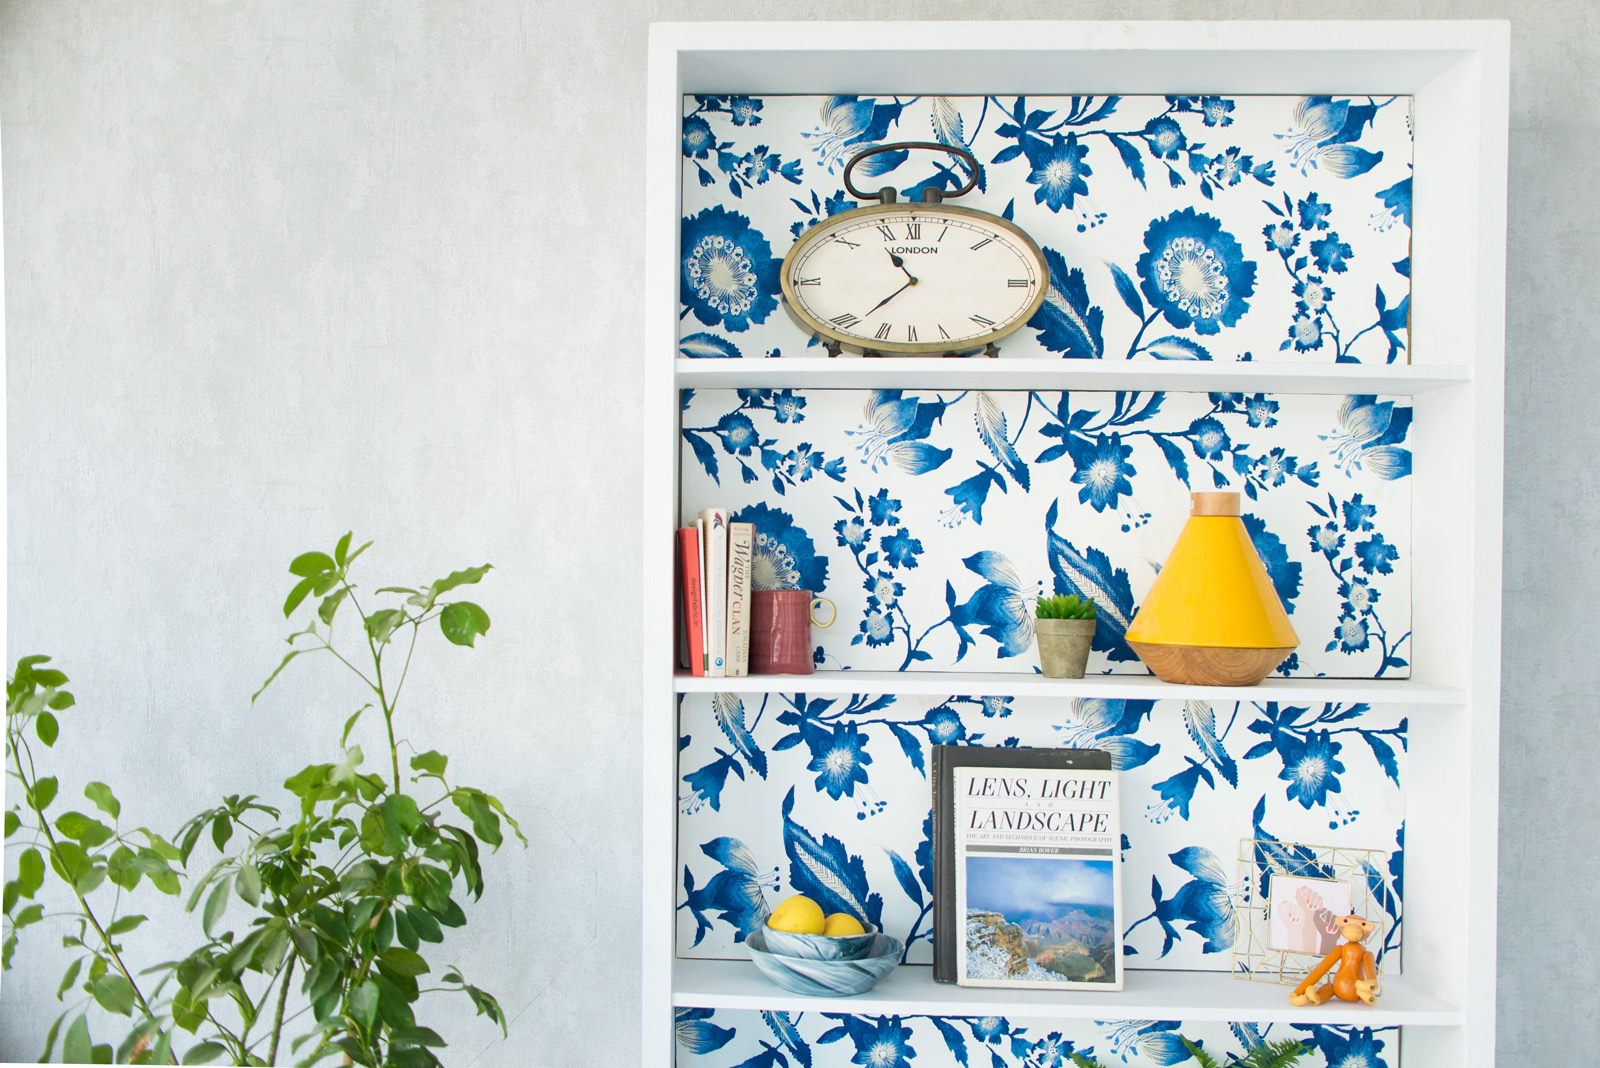 DIY wallpaper ideas for shelves in white and blue colour - Beautiful Homes